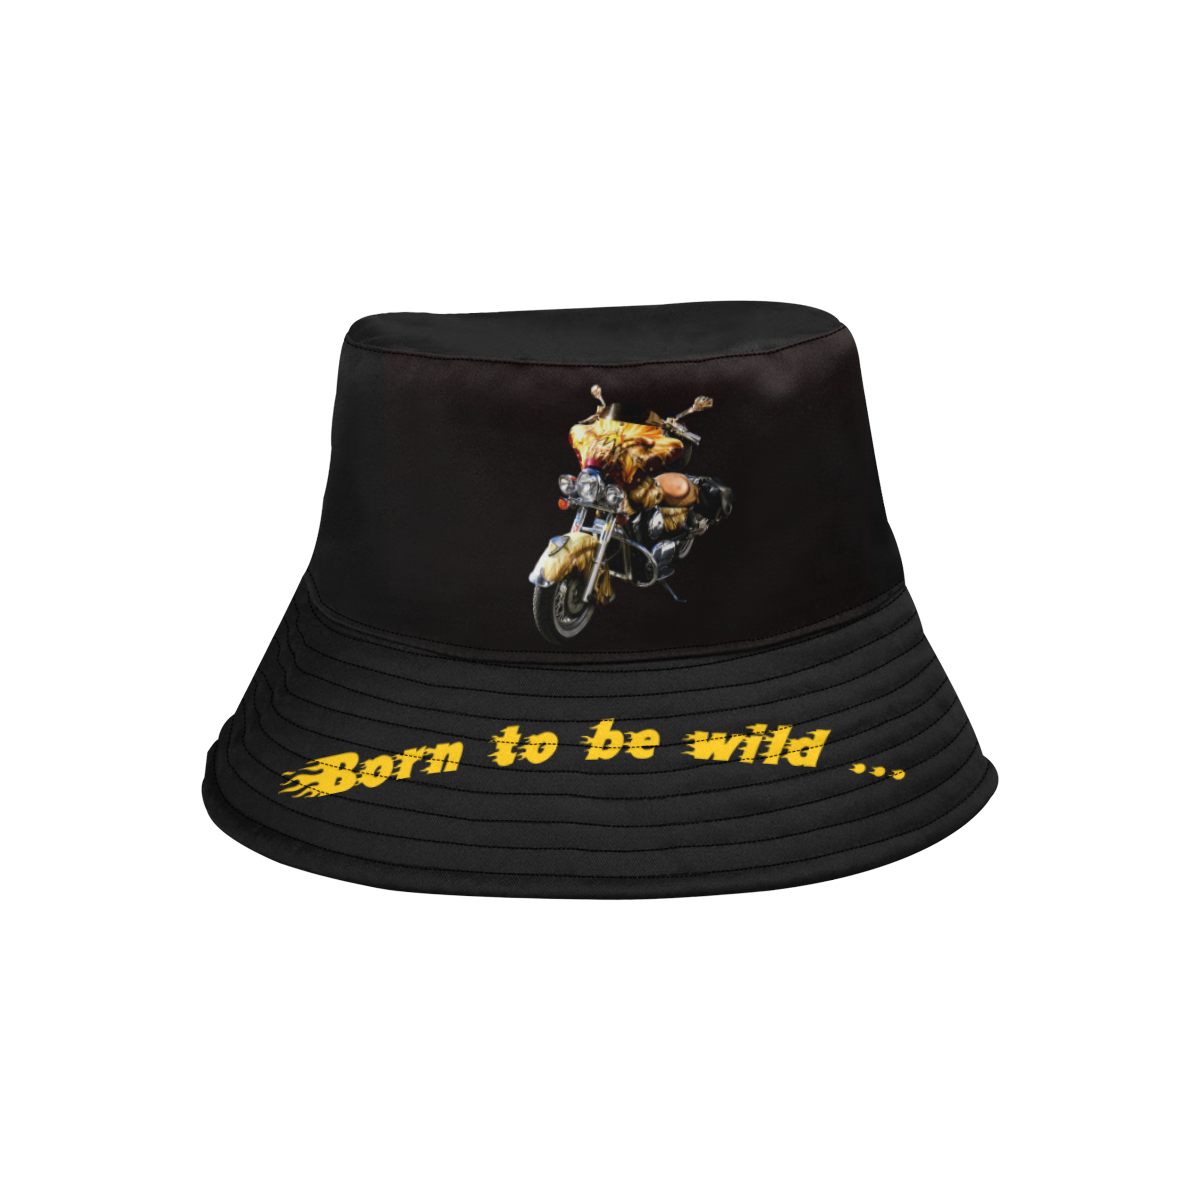 Born to be wild Motorcycle All Over Print Bucket Hat